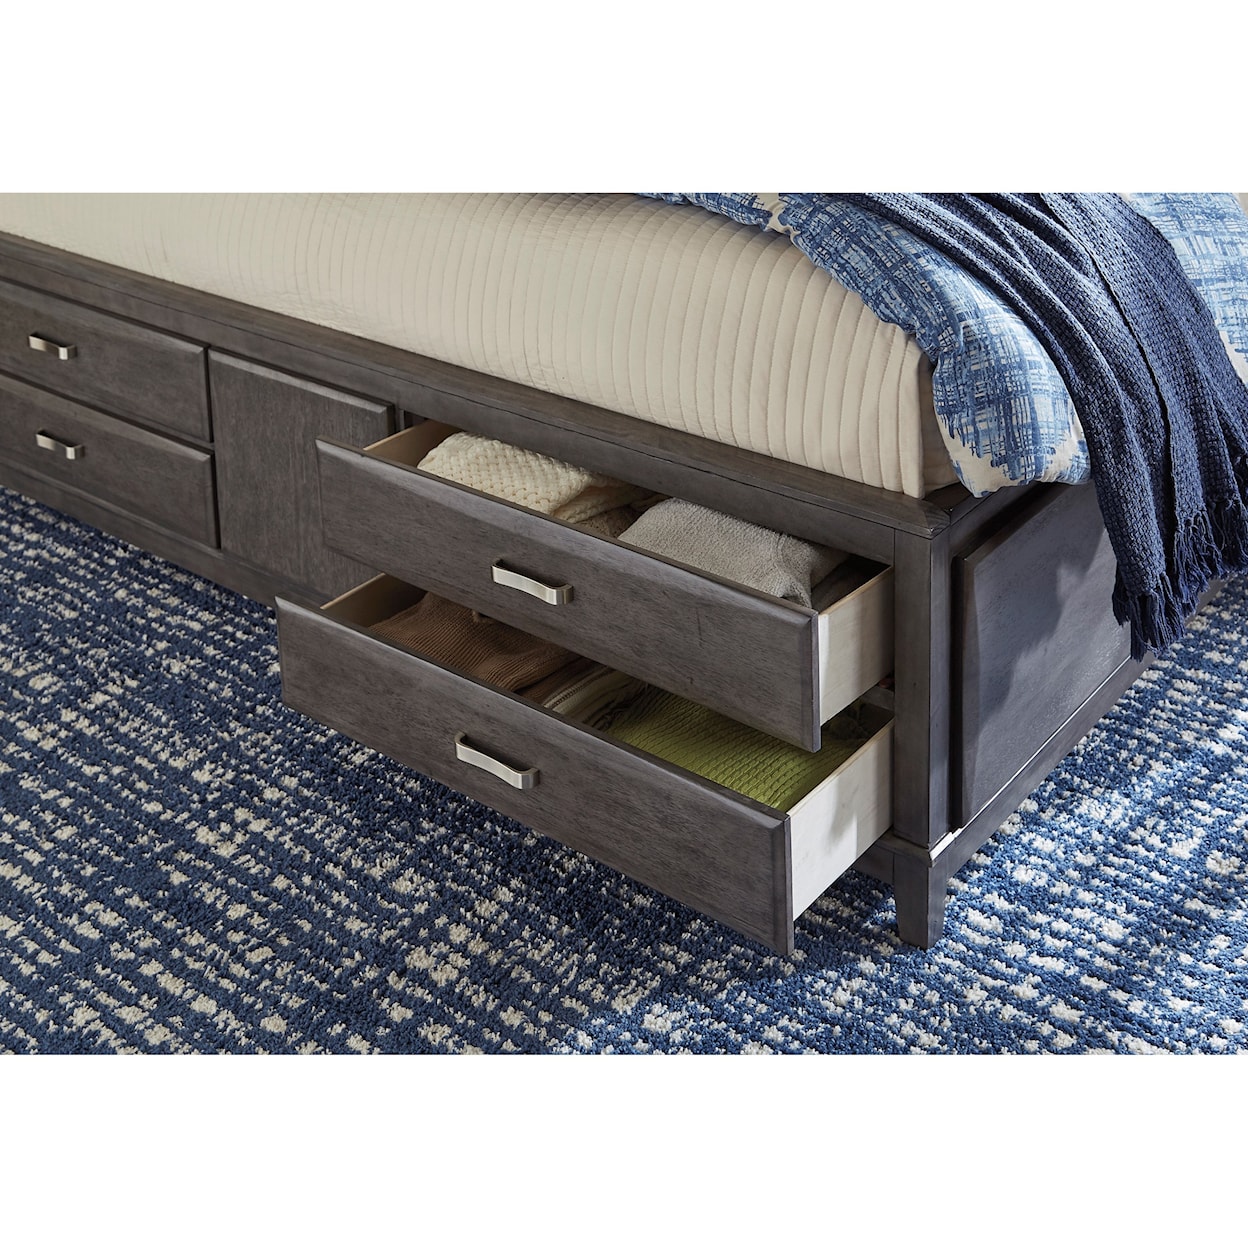 Signature Design by Ashley Caitbrook King Storage Bed with 8 Drawers